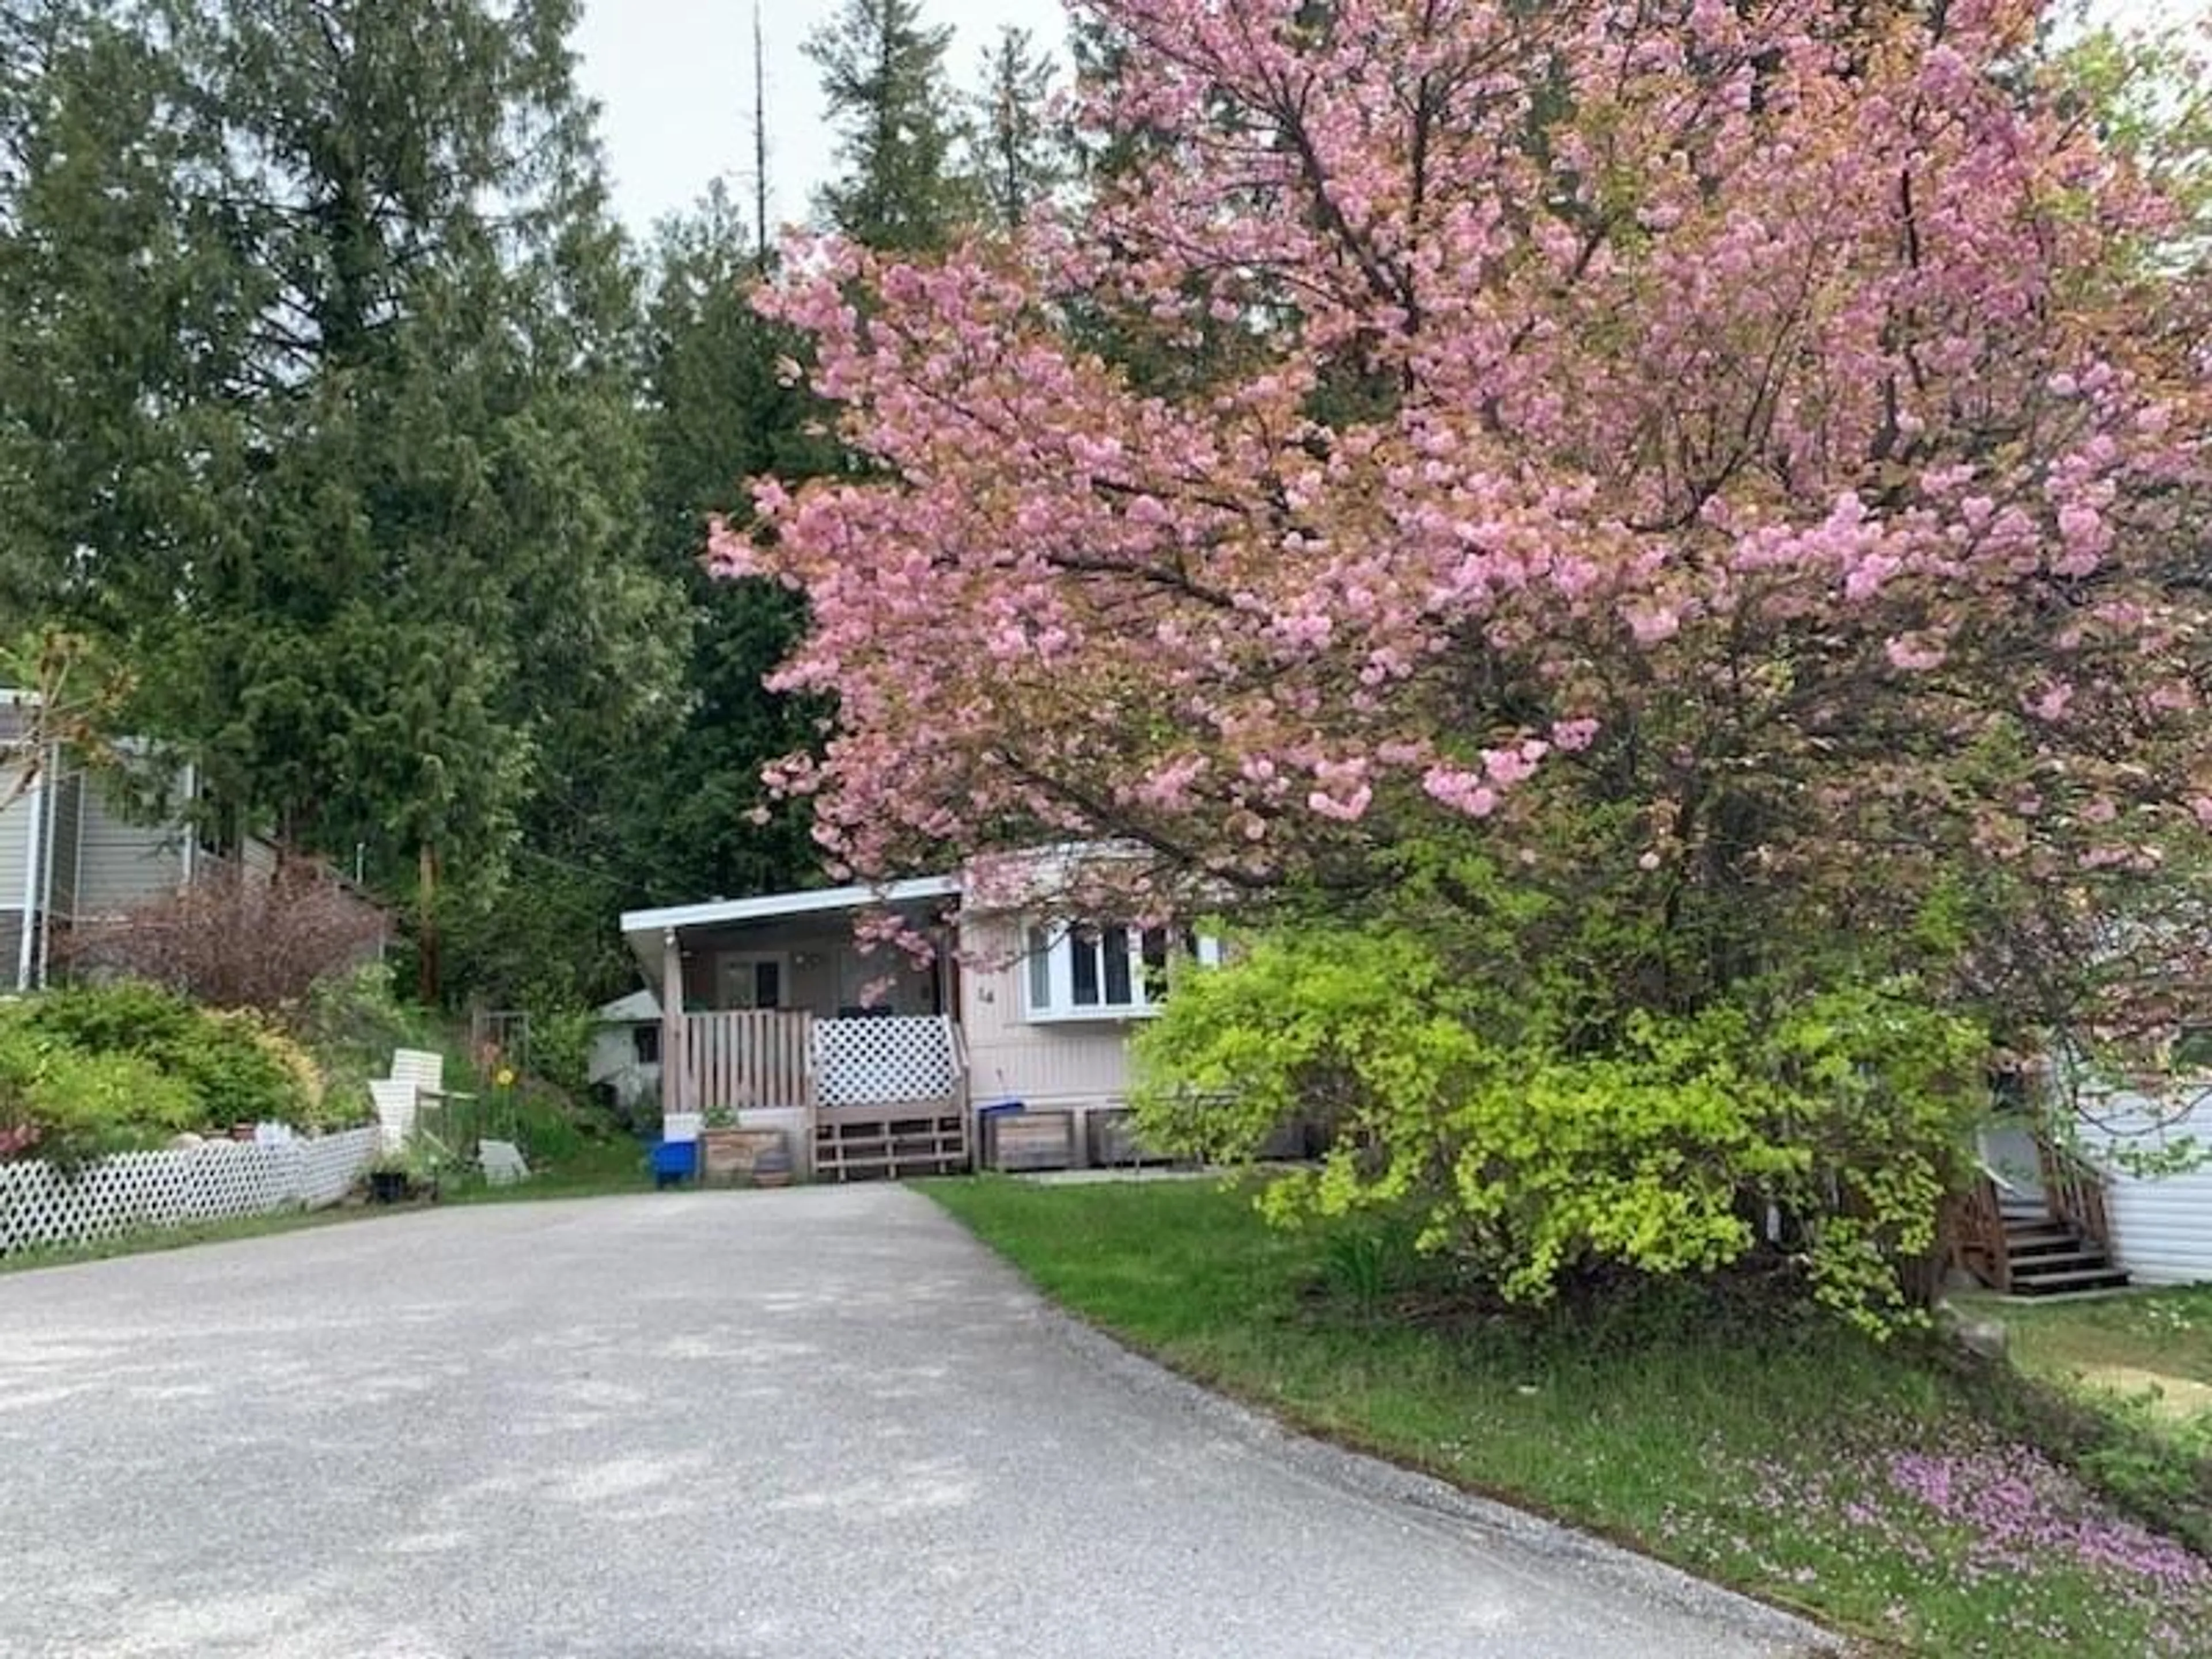 Outside view for 14 - 4029 BROADWATER RD, Robson British Columbia V1N4V6